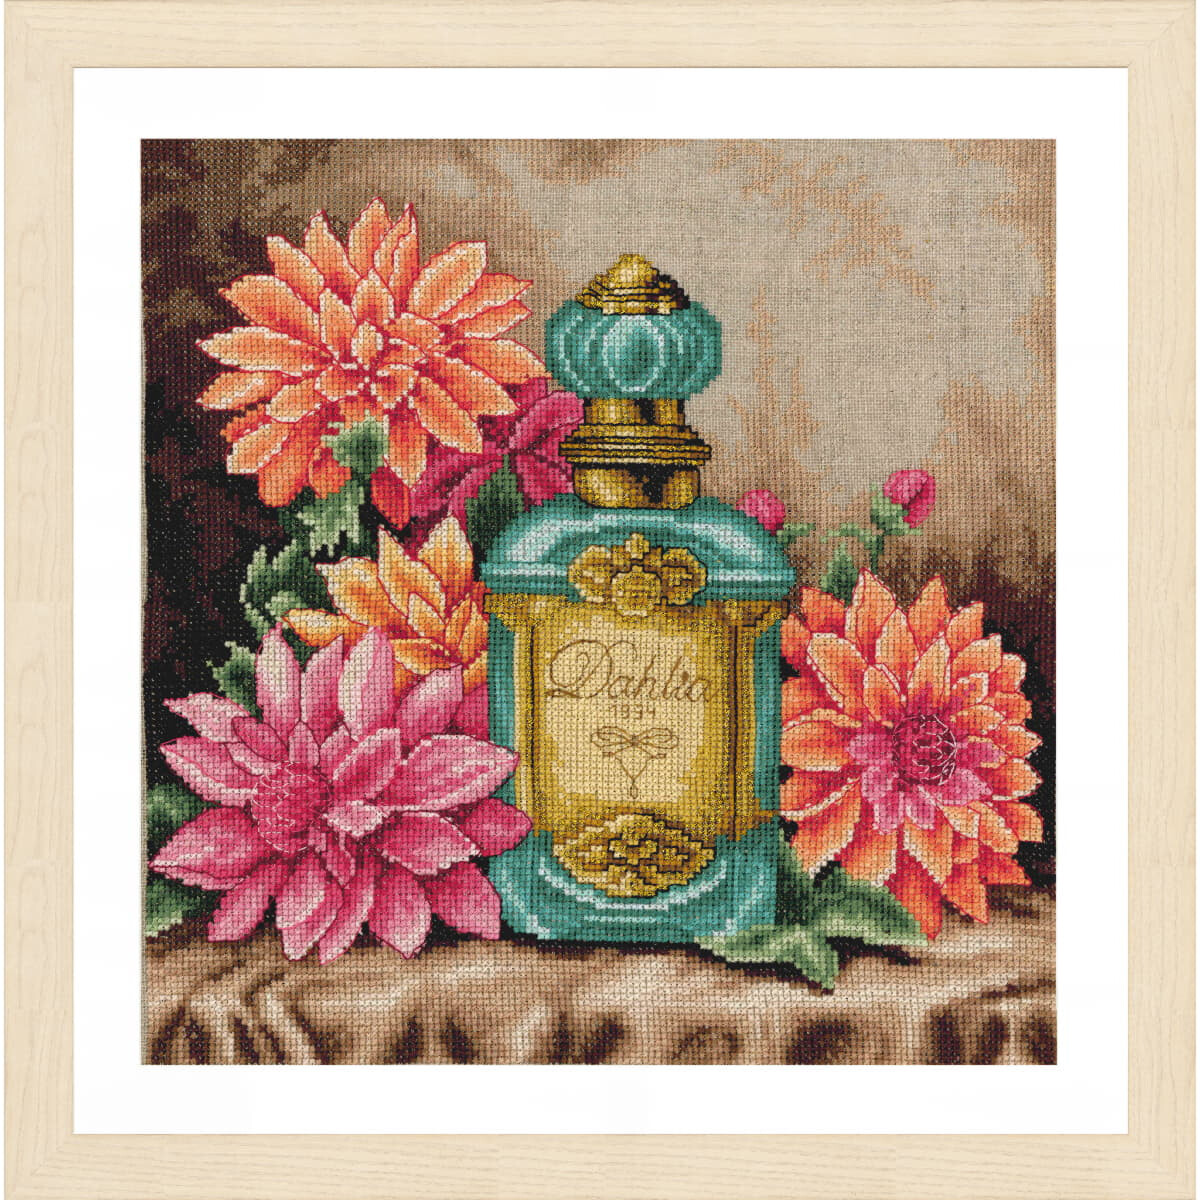 A framed embroidery picture from Lanarte embroidery pack...